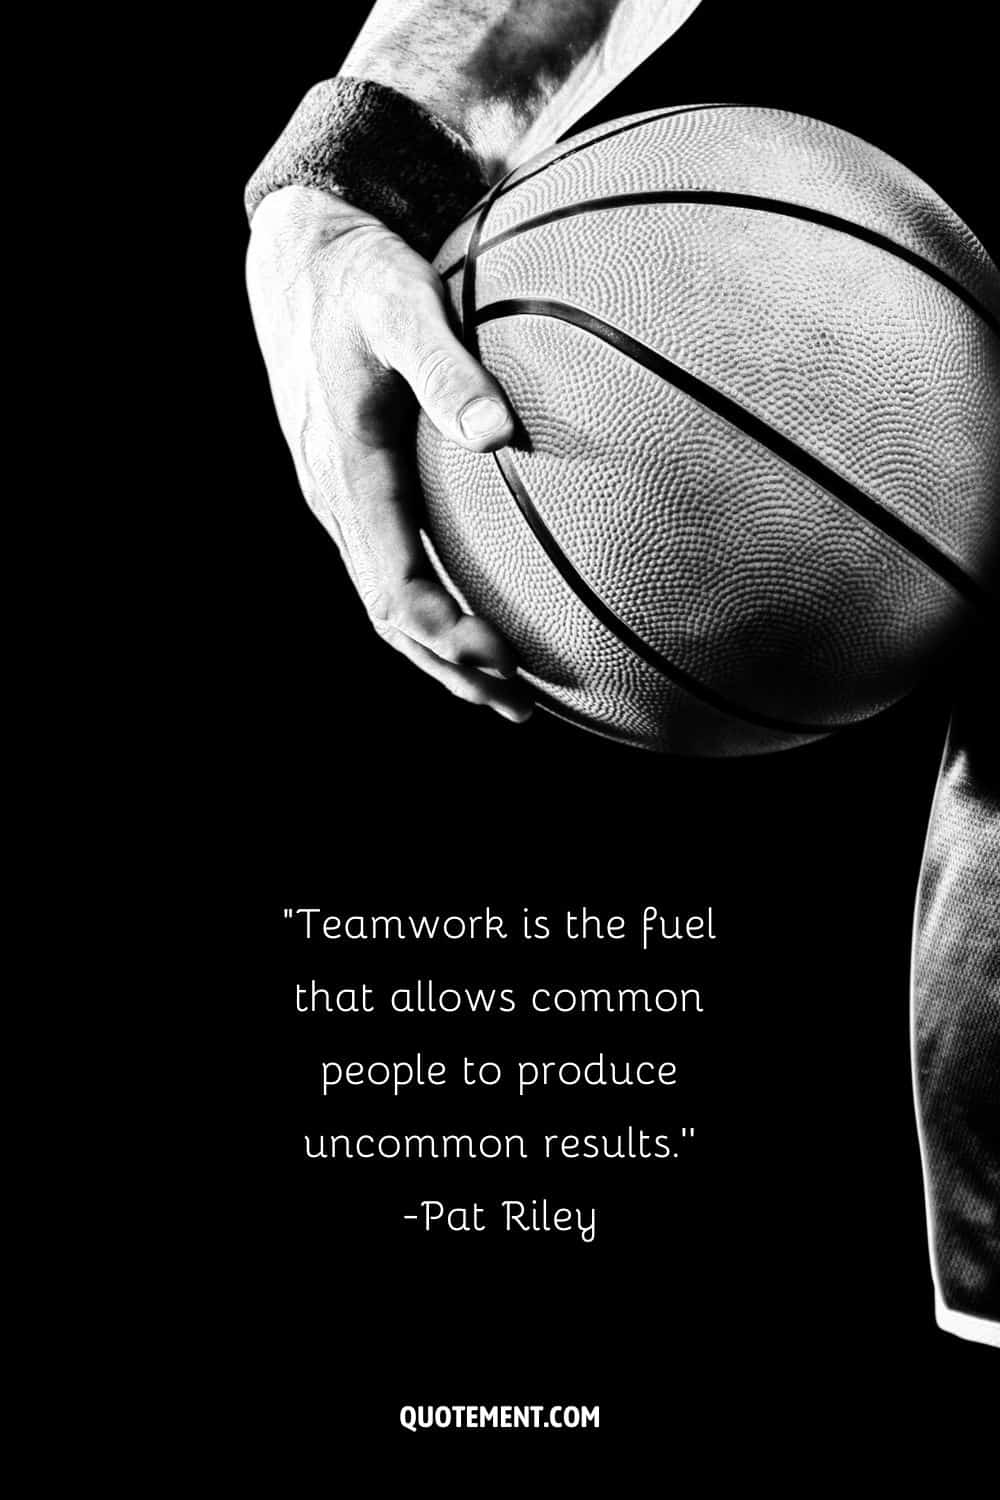 Teamwork is the fuel that allows common people to produce uncommon results